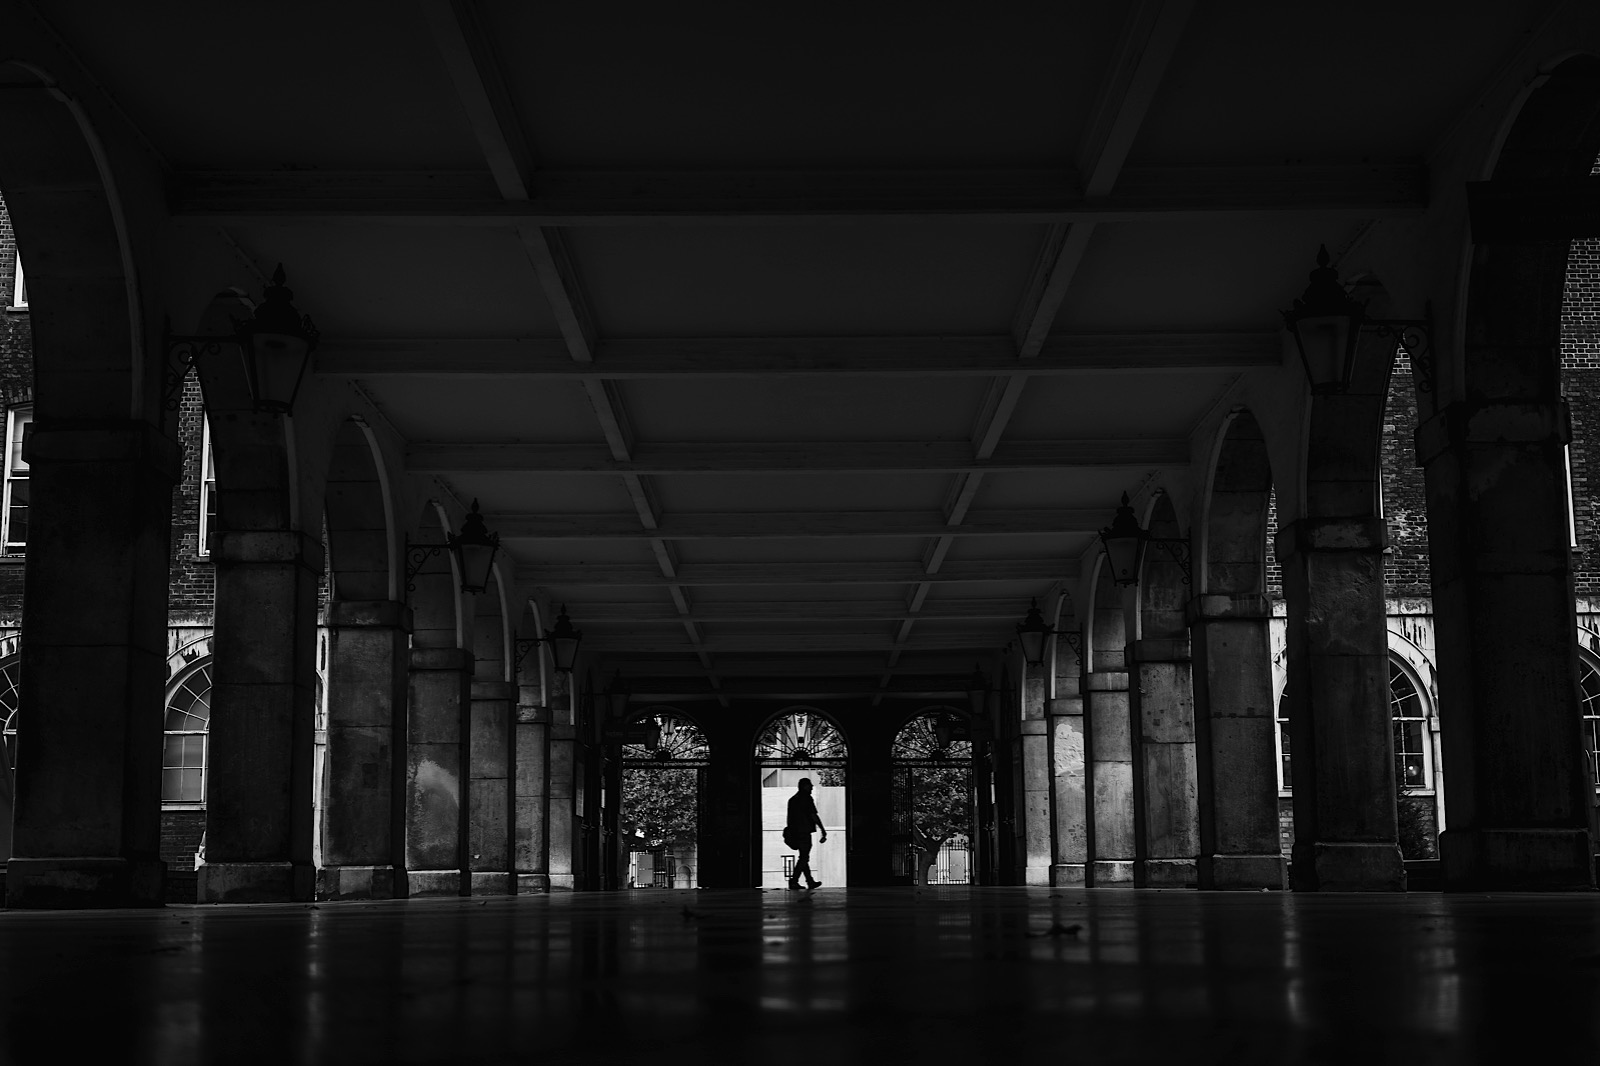 Best Locations for Street Photography in London showing image of man walking inj covered walkway